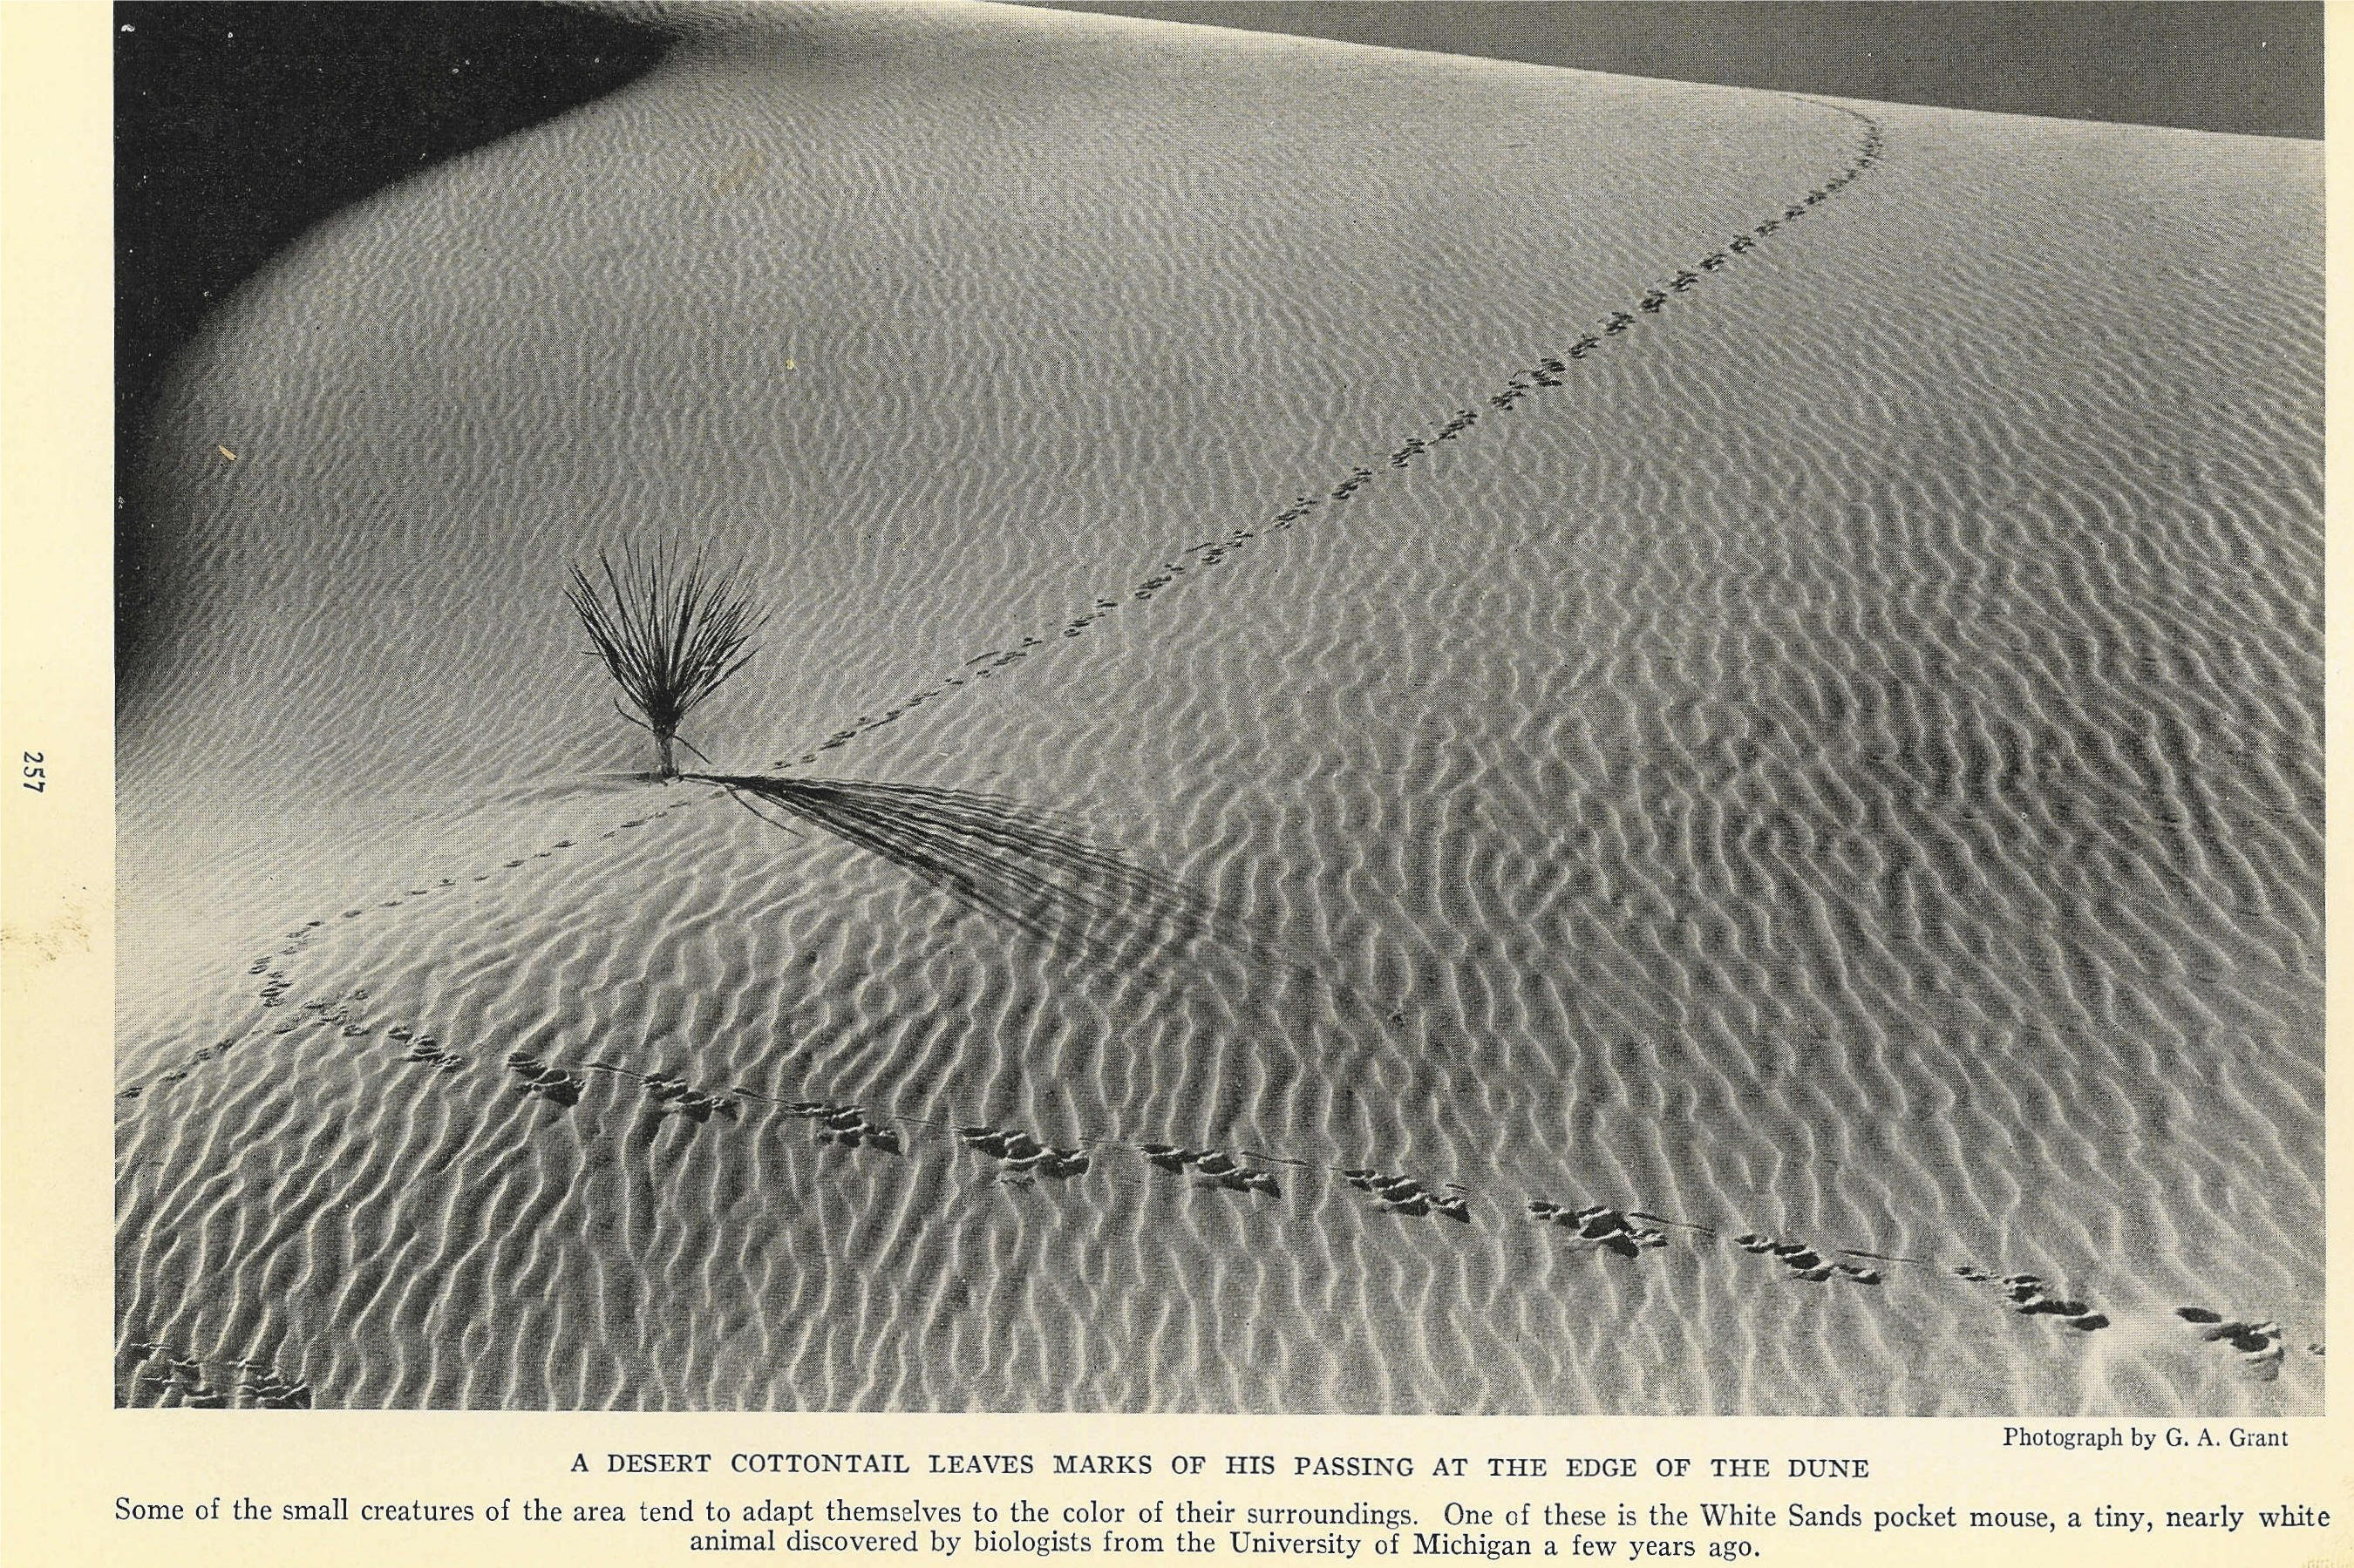 The White Sands of Alamogordo - National Geographic, August 1935